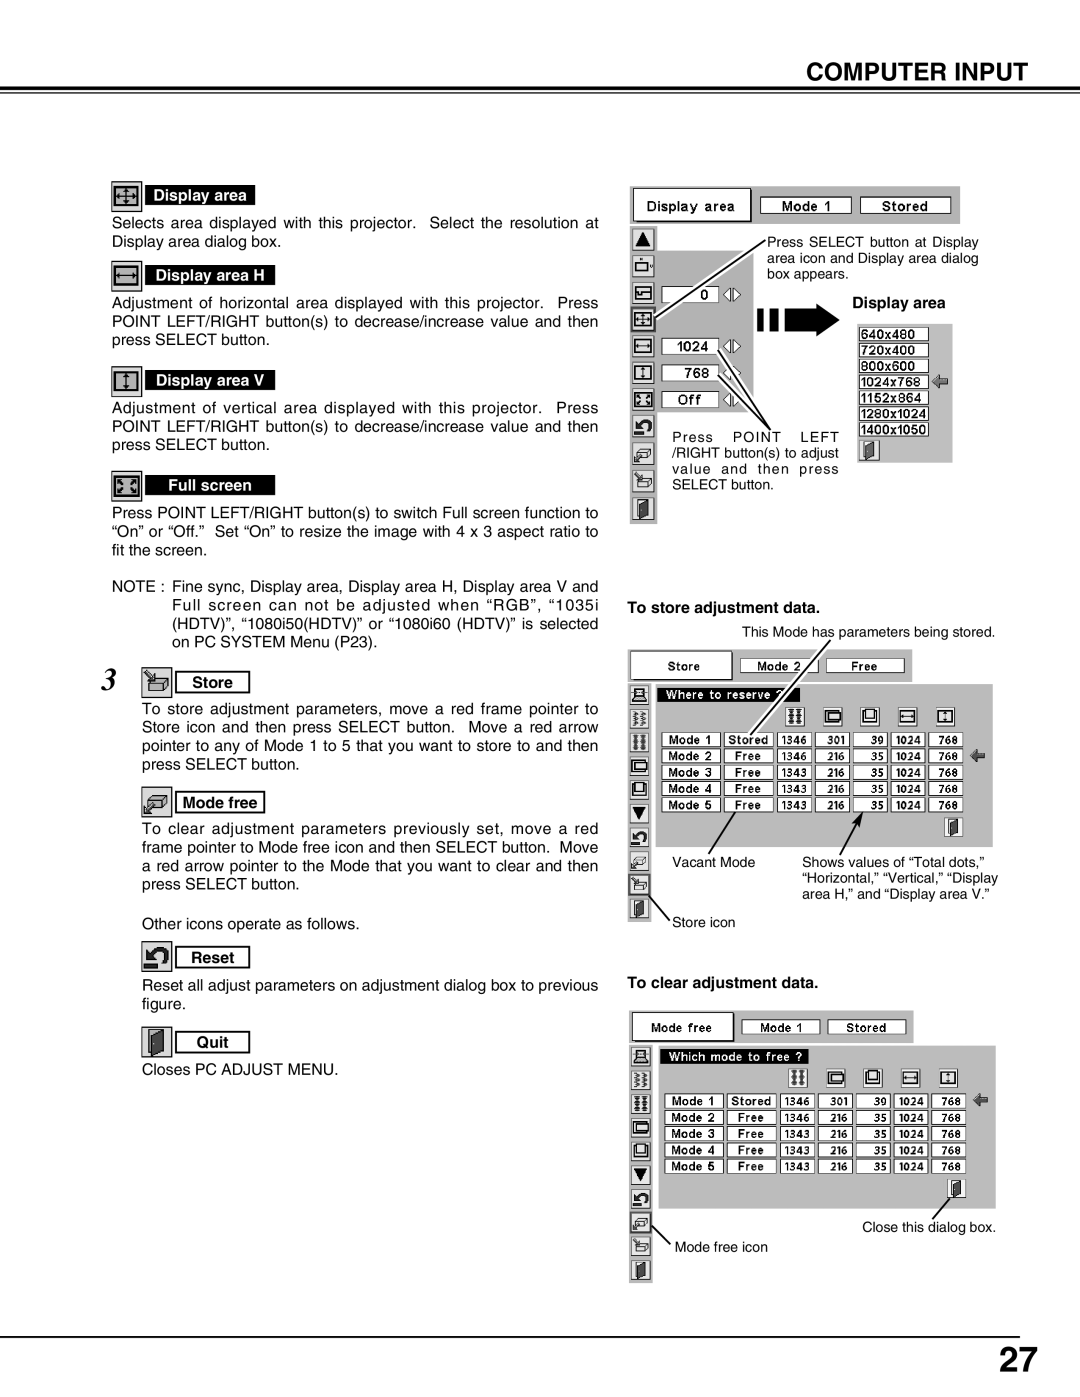 Christie Digital Systems 38-VIV207-01 user manual Computer Input, Store, Mode free, Reset, Quit, Display area 